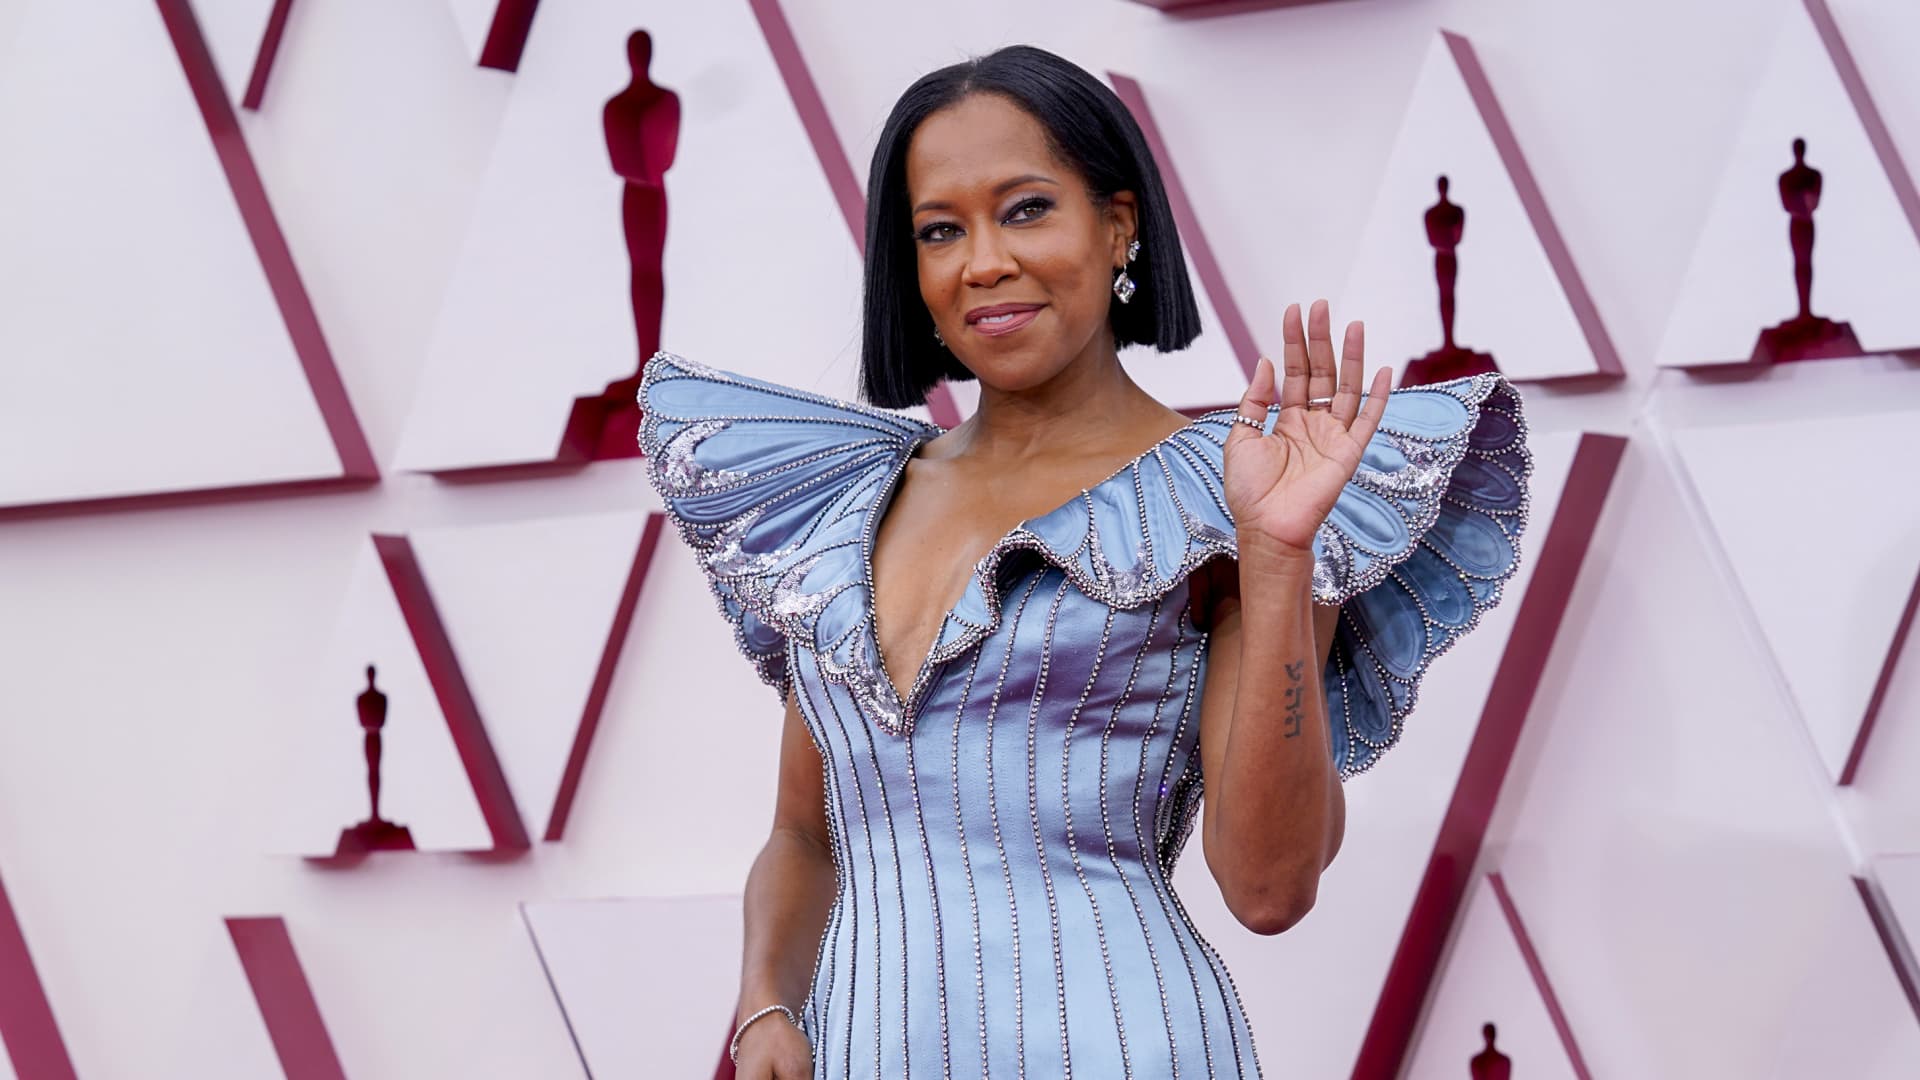 Regina King attends the 93rd Annual Academy Awards at Union Station on April 25, 2021 in Los Angeles, California.